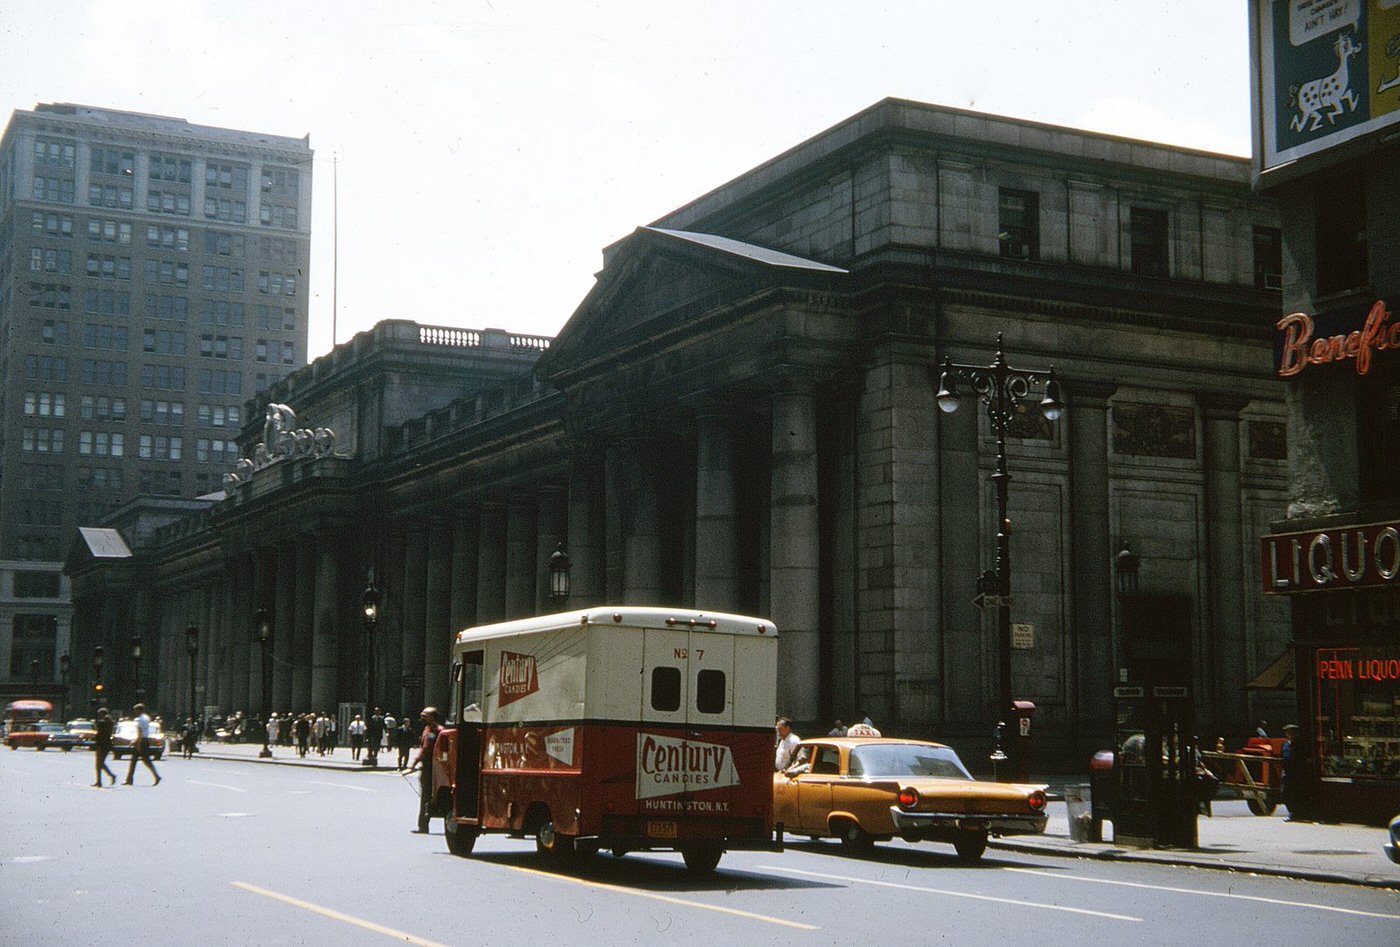 entury Candy Delivery Truck and Pennsylvania Station, 1962